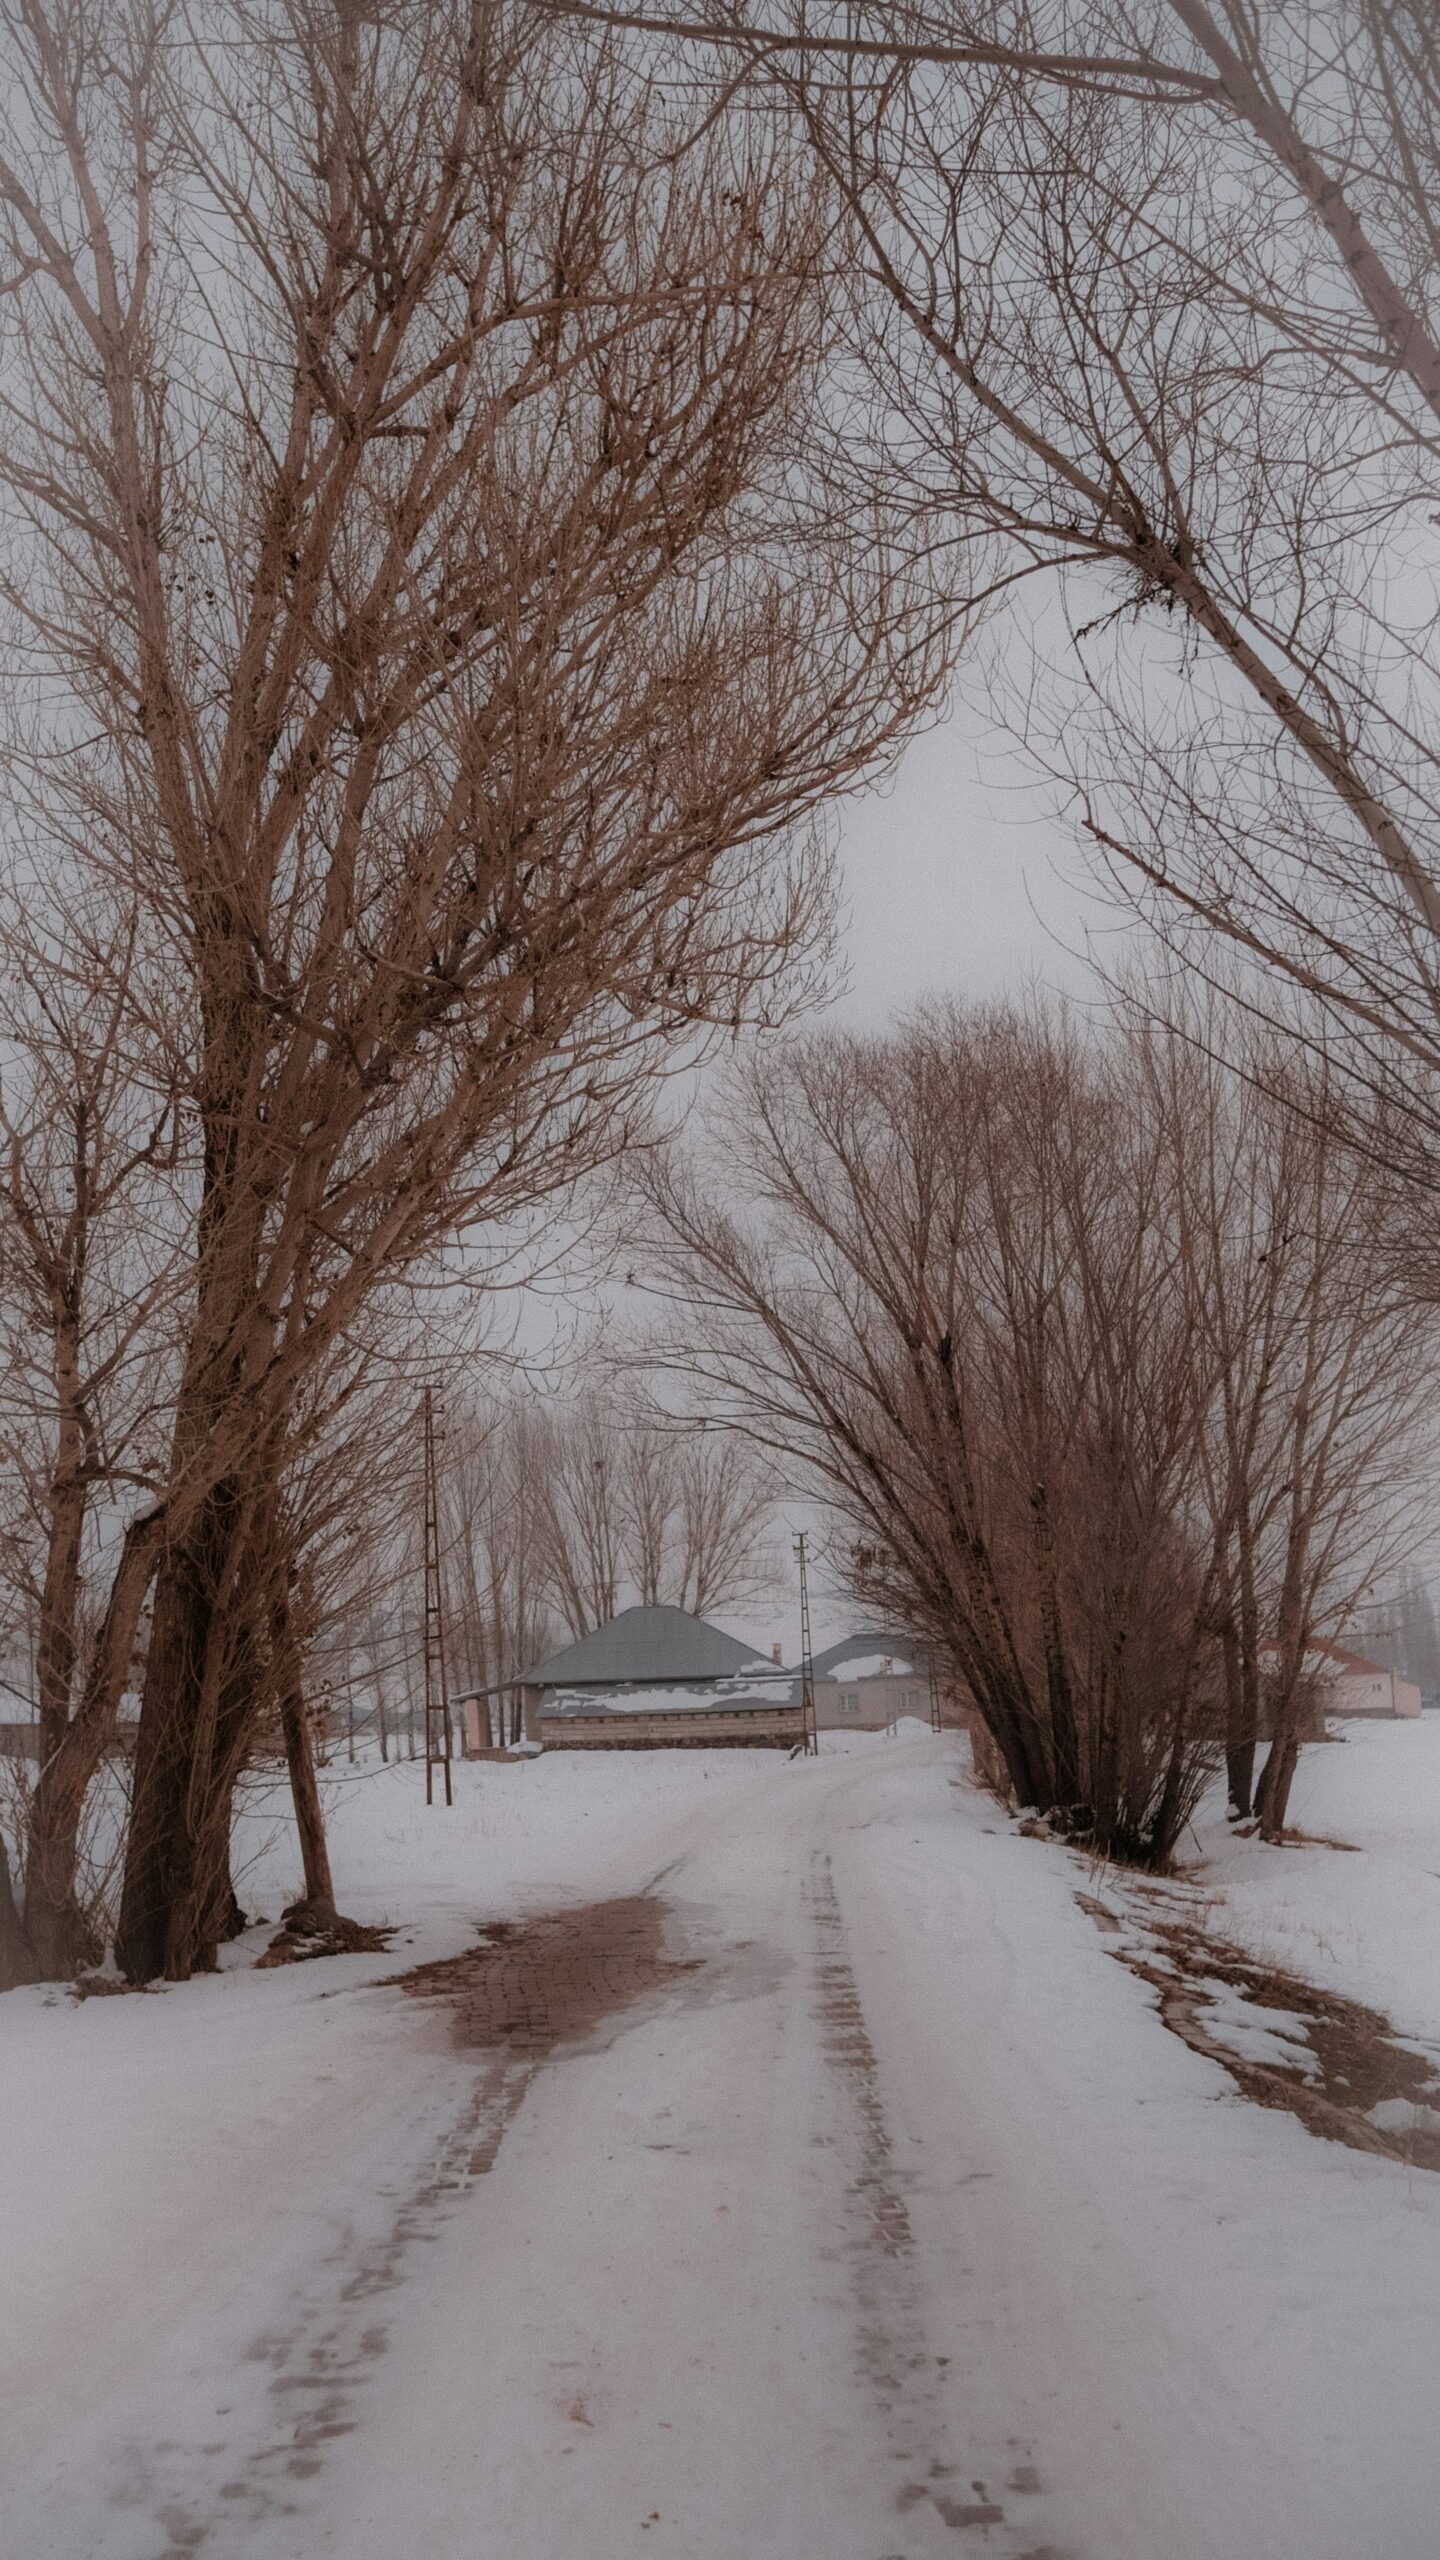 a snow covered road with trees and a house in the background